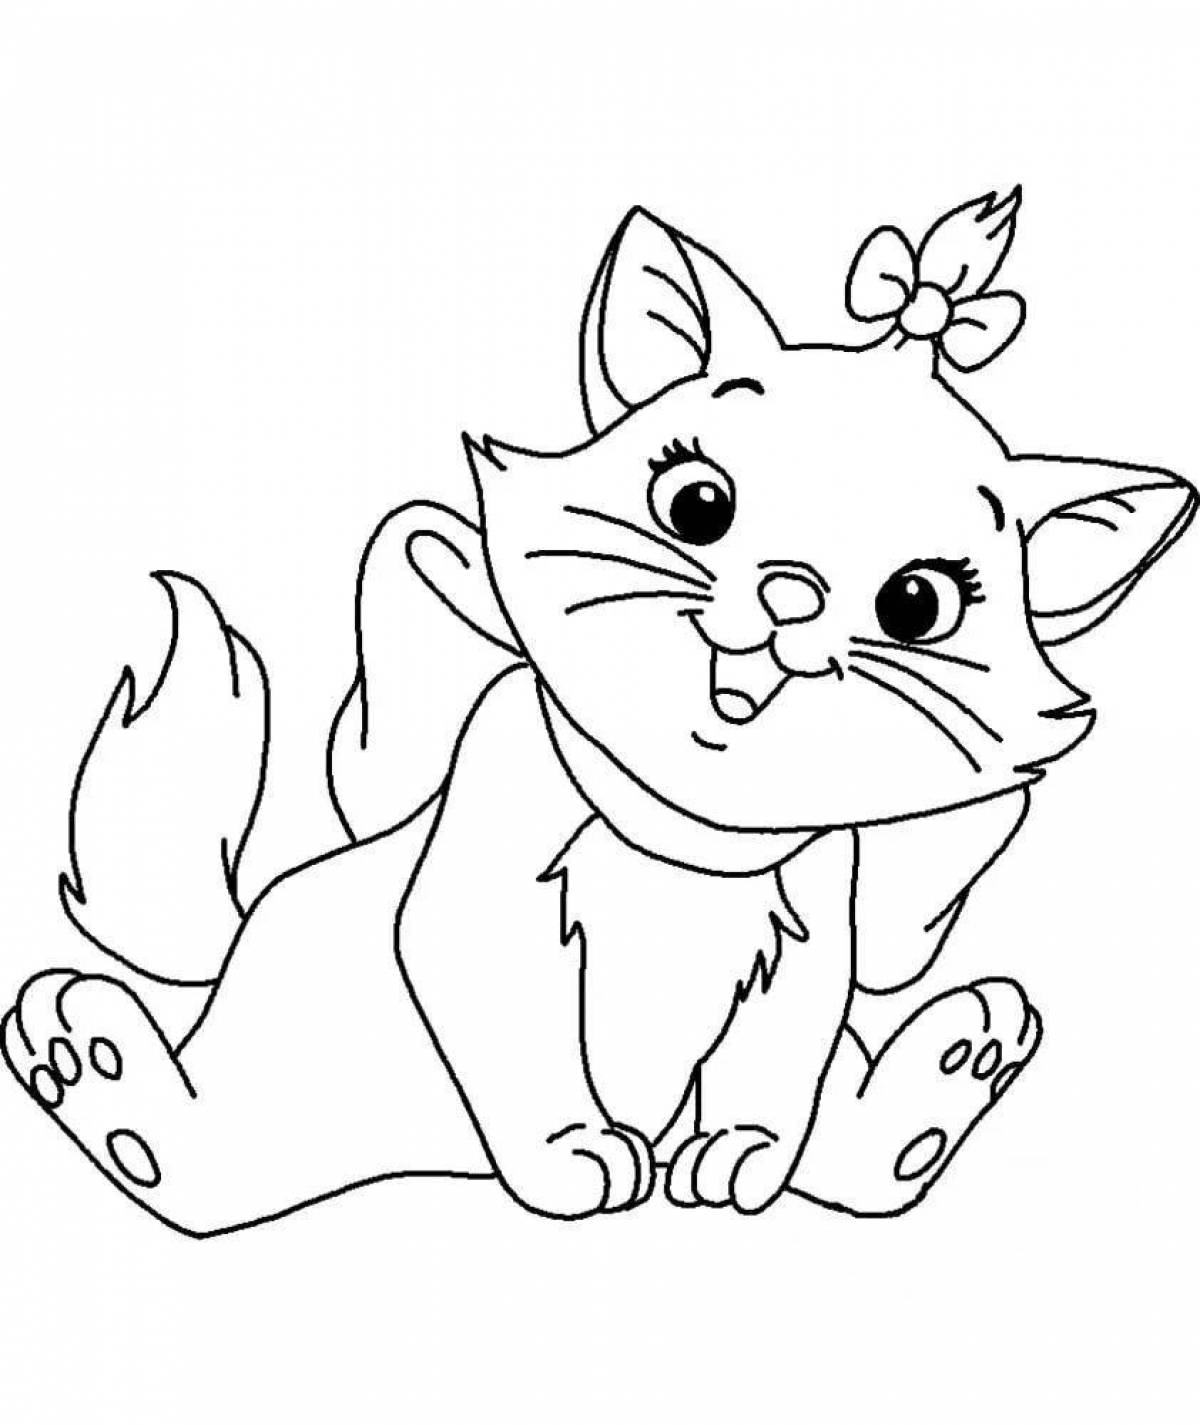 The charm of all cats coloring page